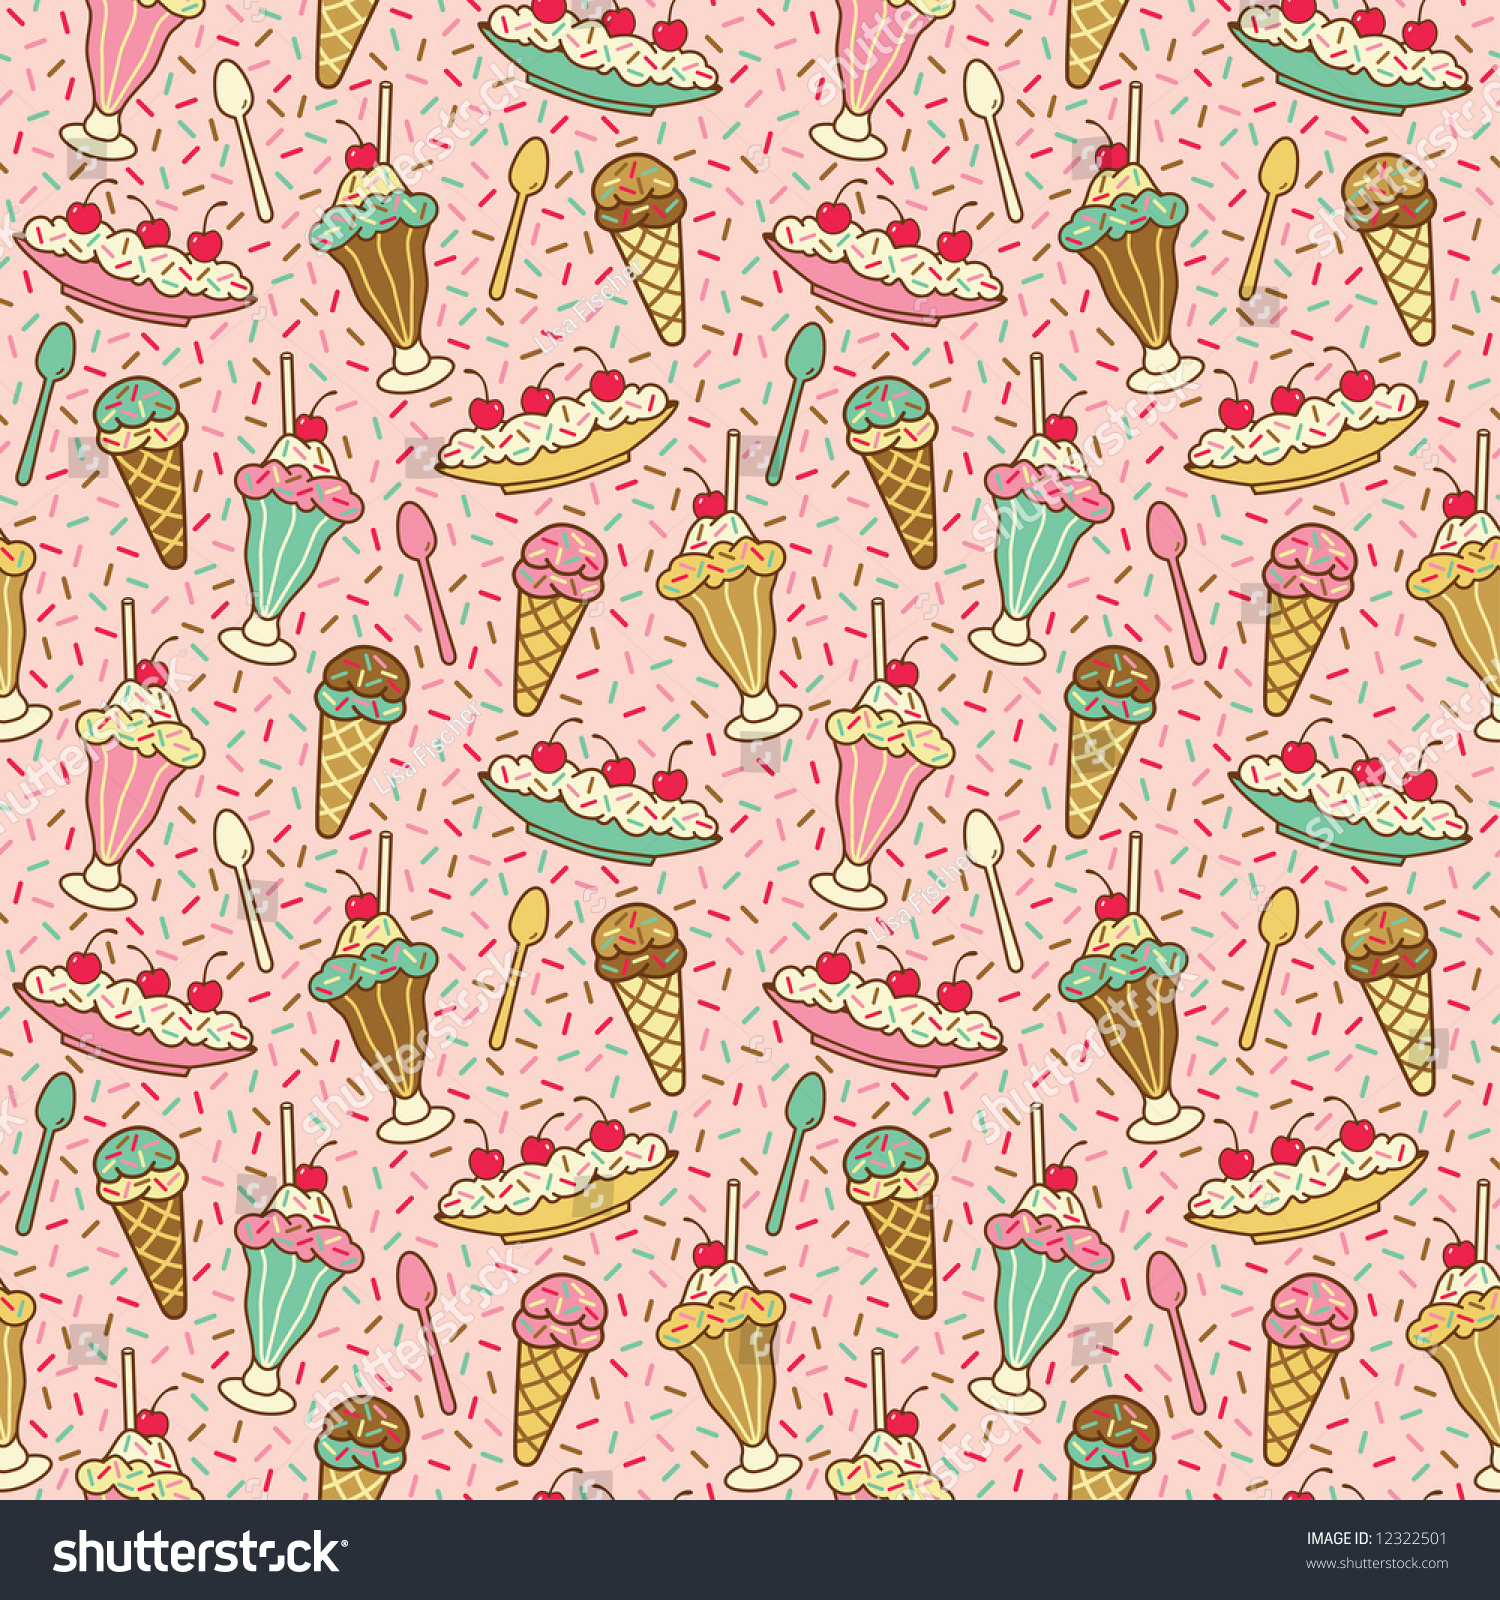 Tiled Bitmap Seamless Pattern Of Ice Cream Desserts With A 